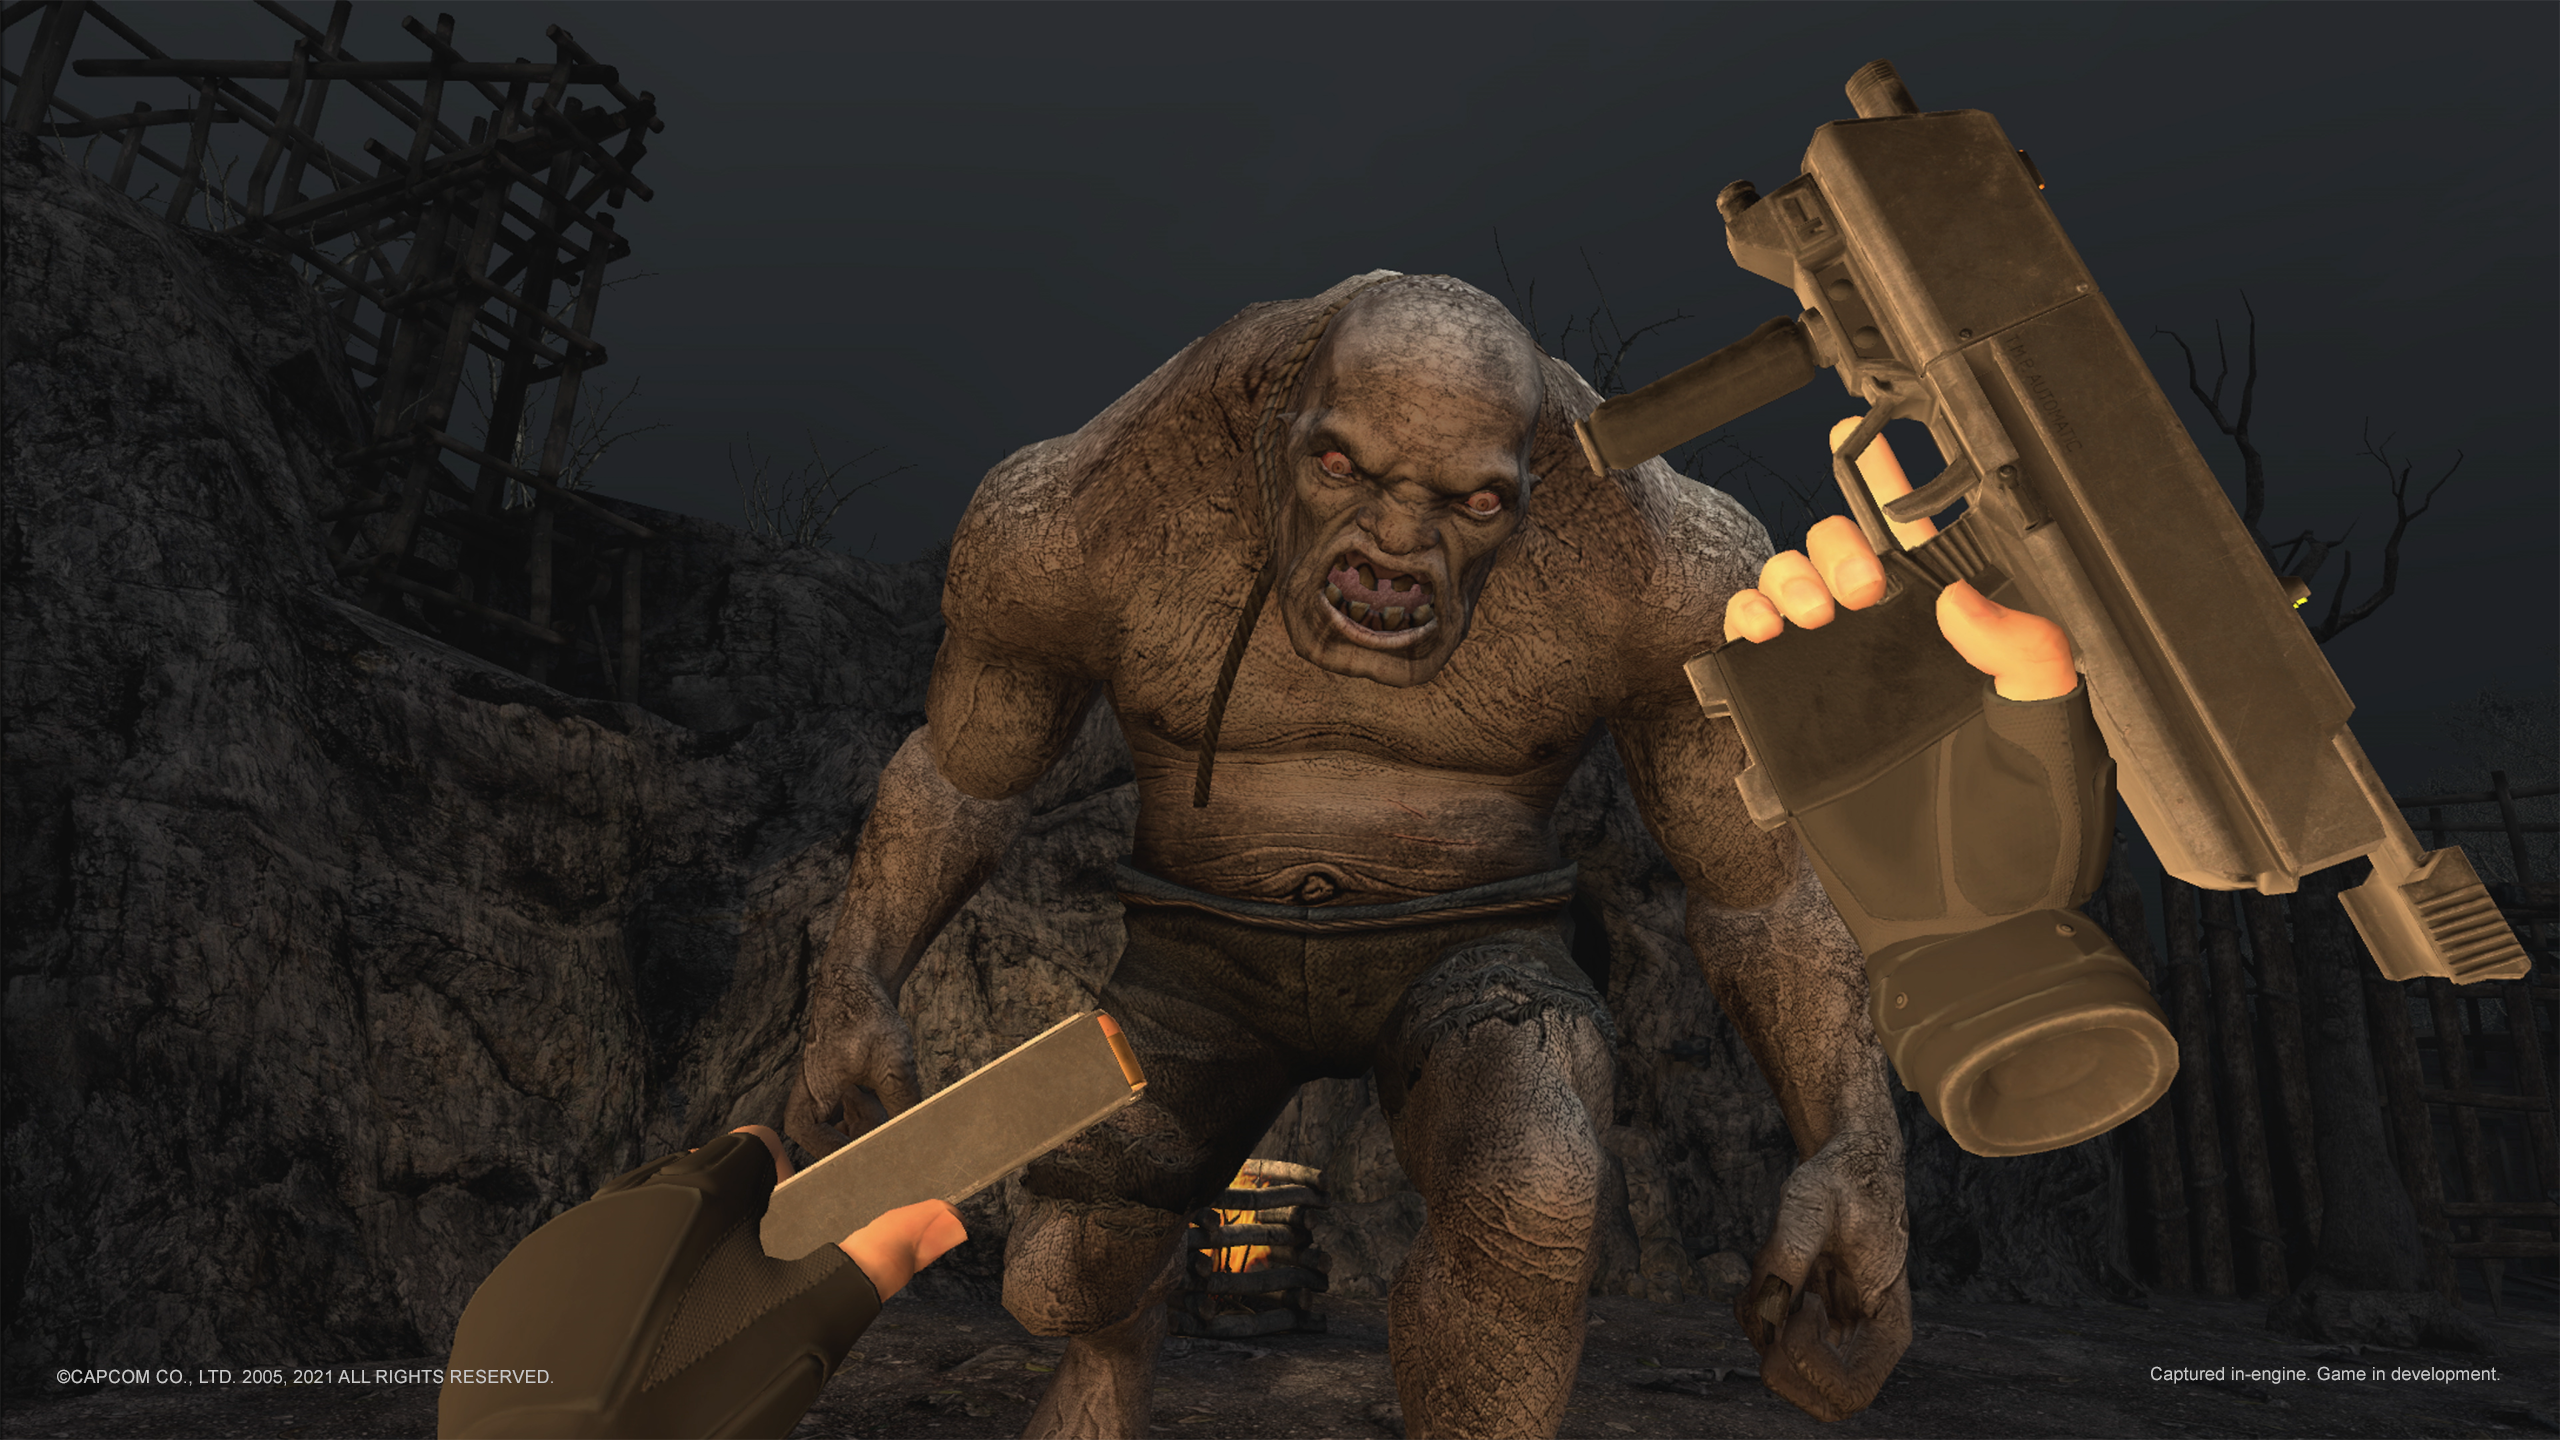 Screenshot from Resident Evil 4 VR as you face a giant monster